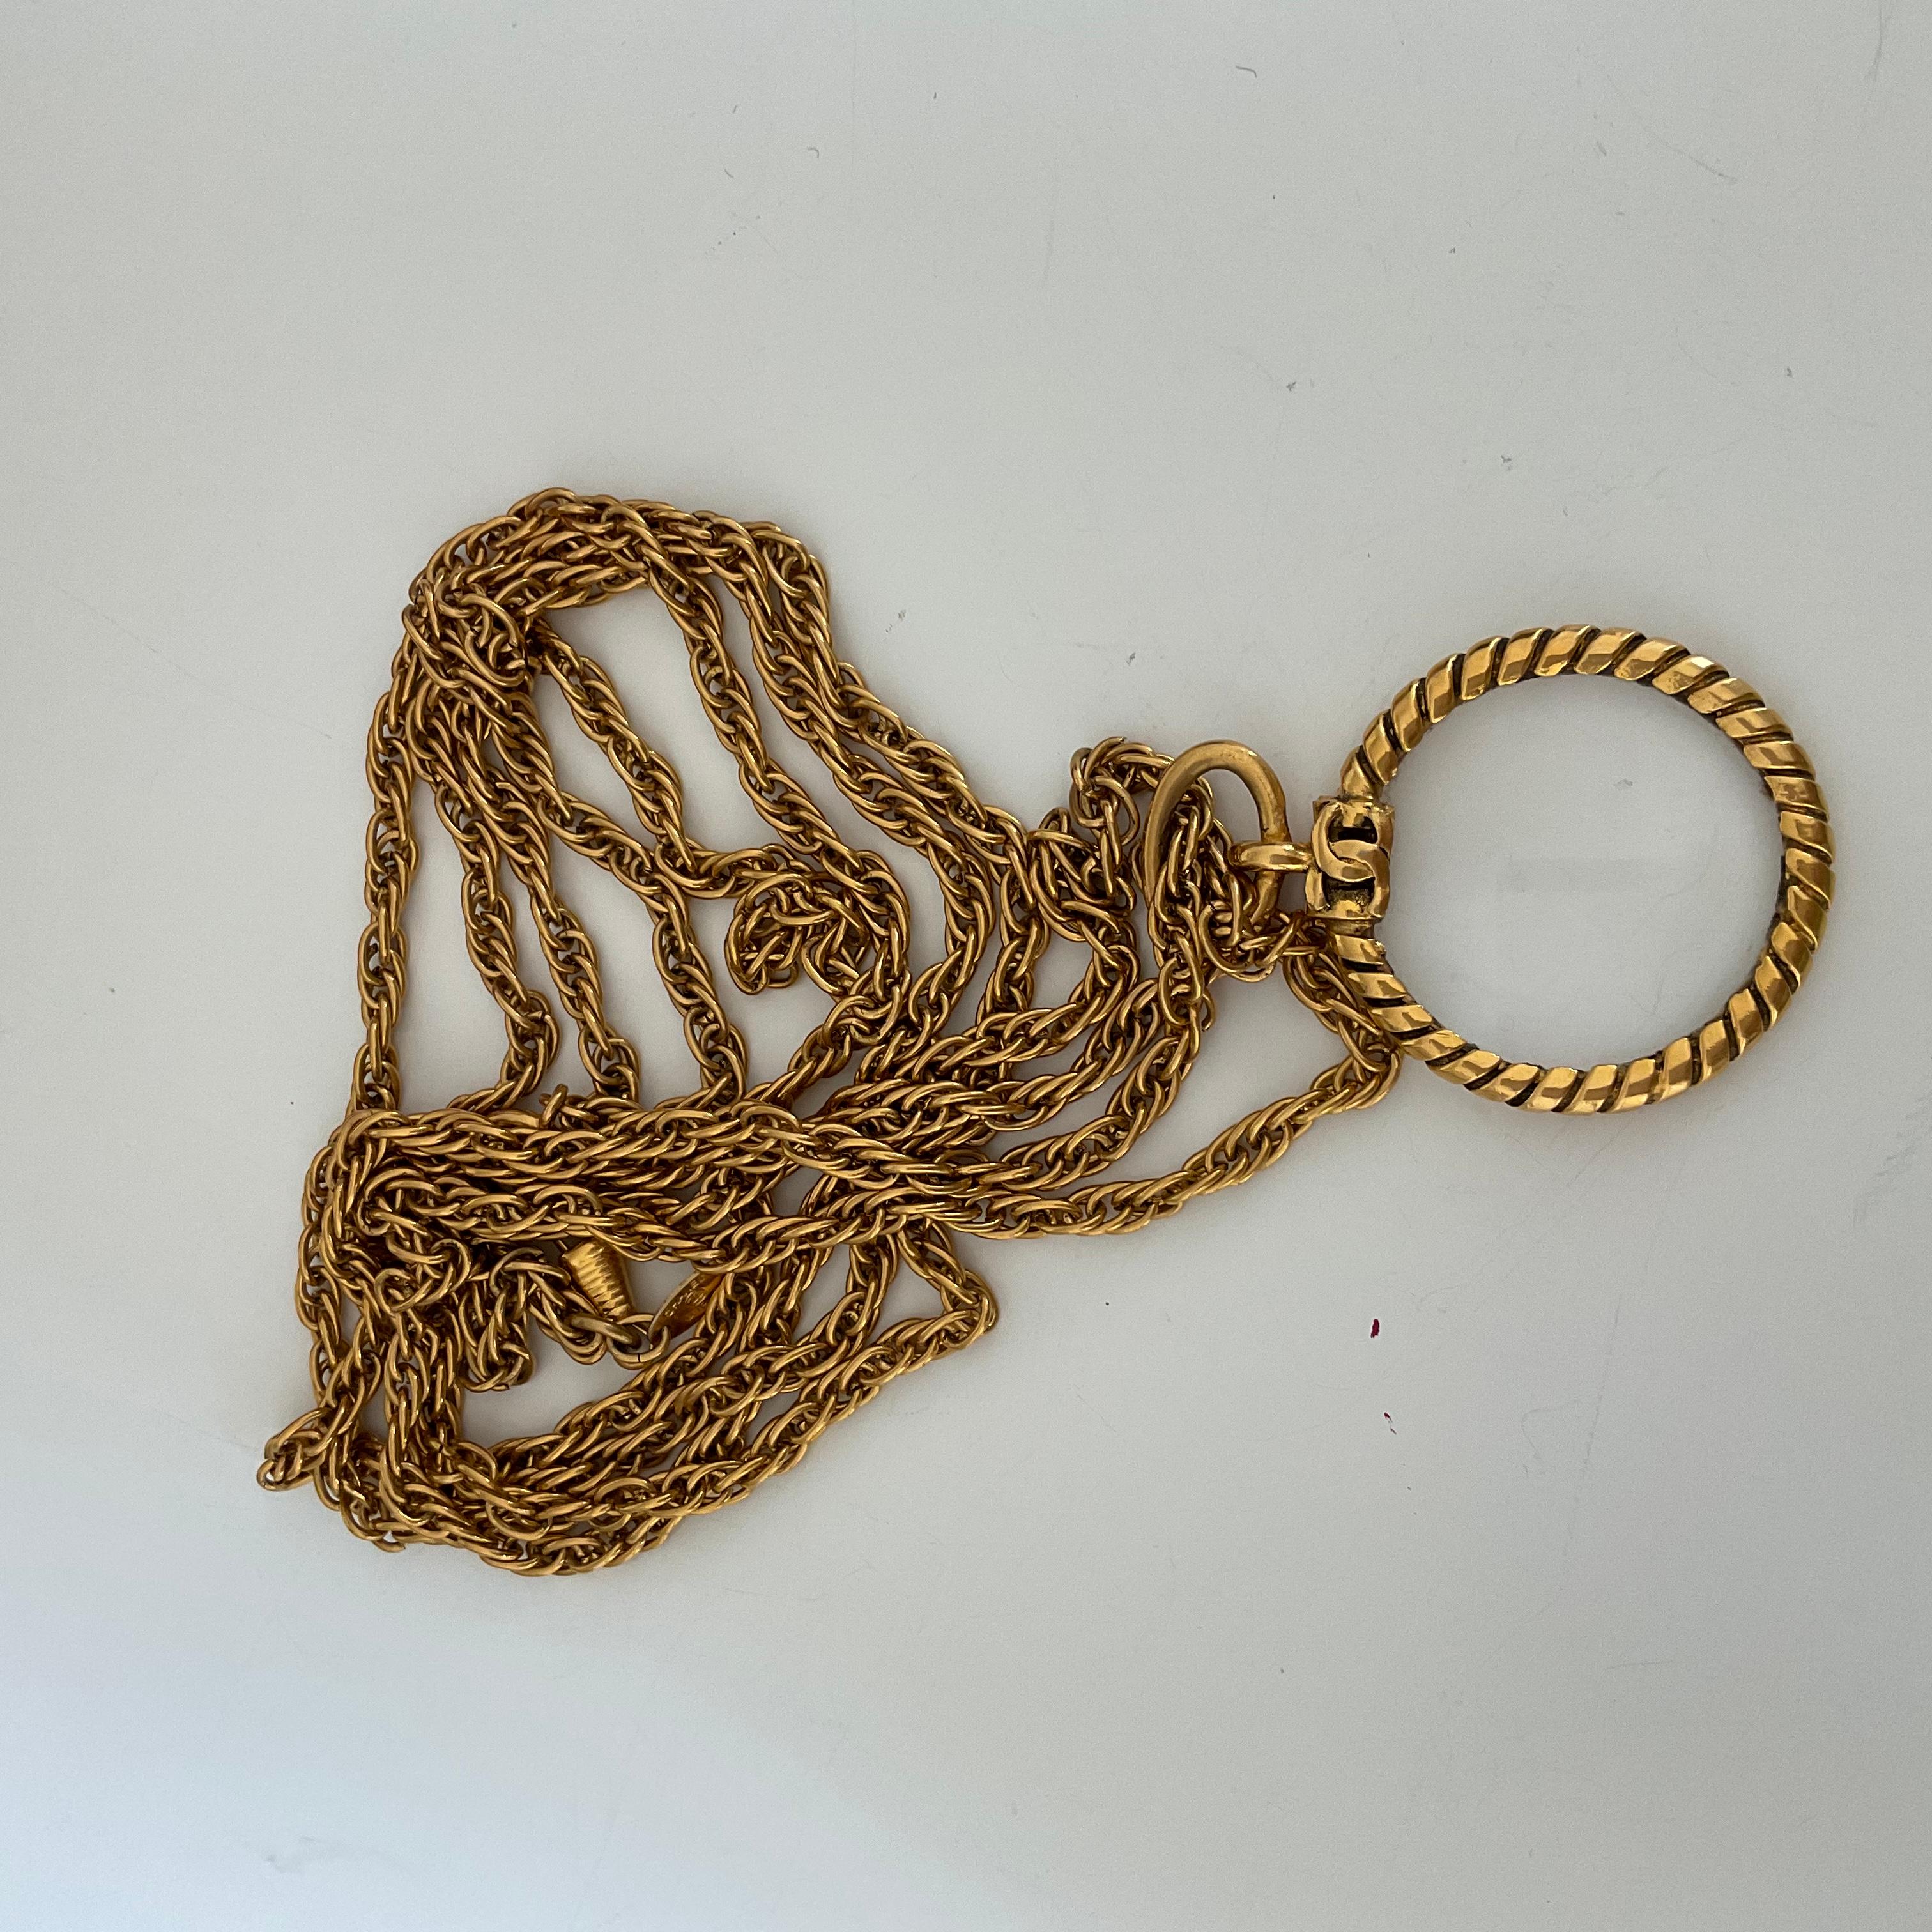 This scarce piece is a Vintage CHANEL gold plated necklace composed of double twisted chains. As a pendant, you will find a magnifier glass circled by another torsade. On the top of the pendant, where the chains get attached, there is the iconic